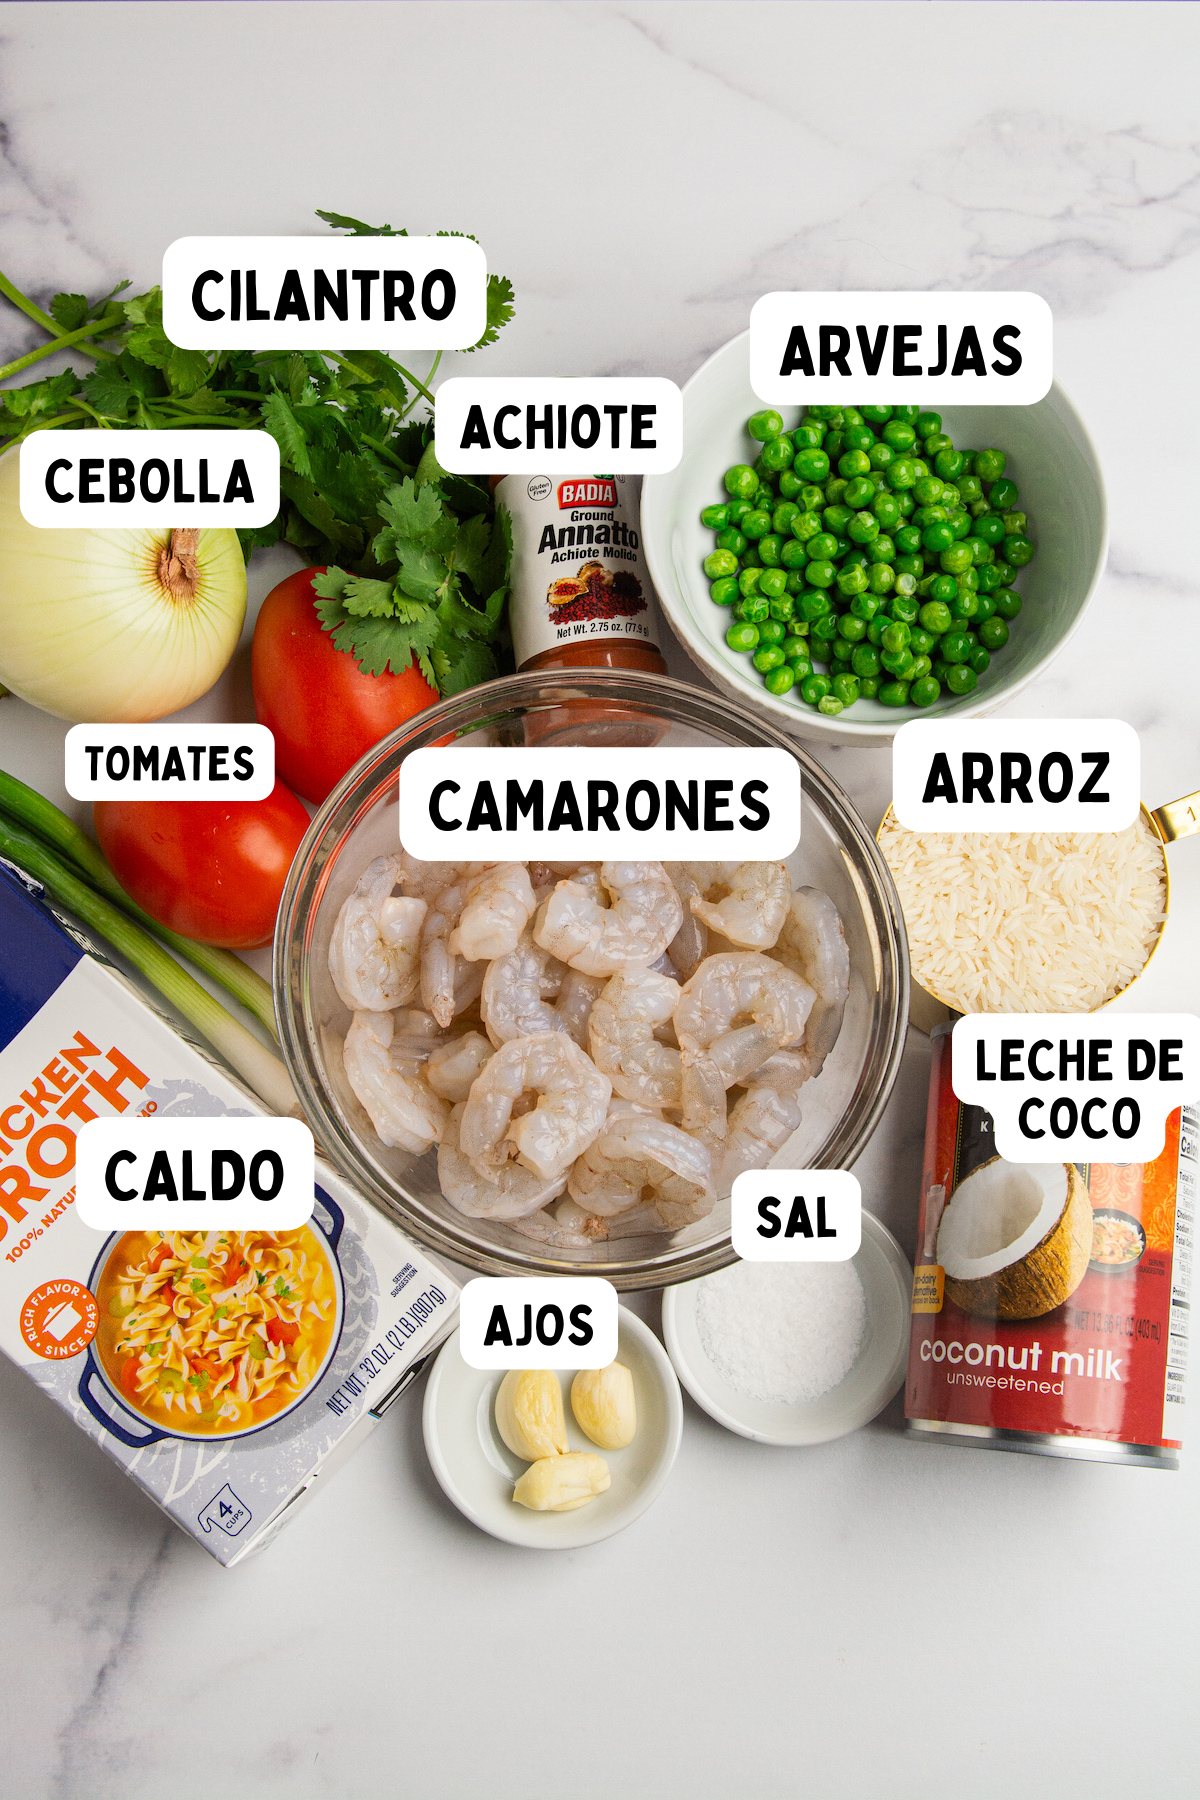 Ingredients for making arroz con camarones or shrimp and rice. Rice, shrimp, onion, garlic, tomatoes, cilantro, sweet peas, achiote, chicken broth, coconut milk, and salt labeled in Spanish.